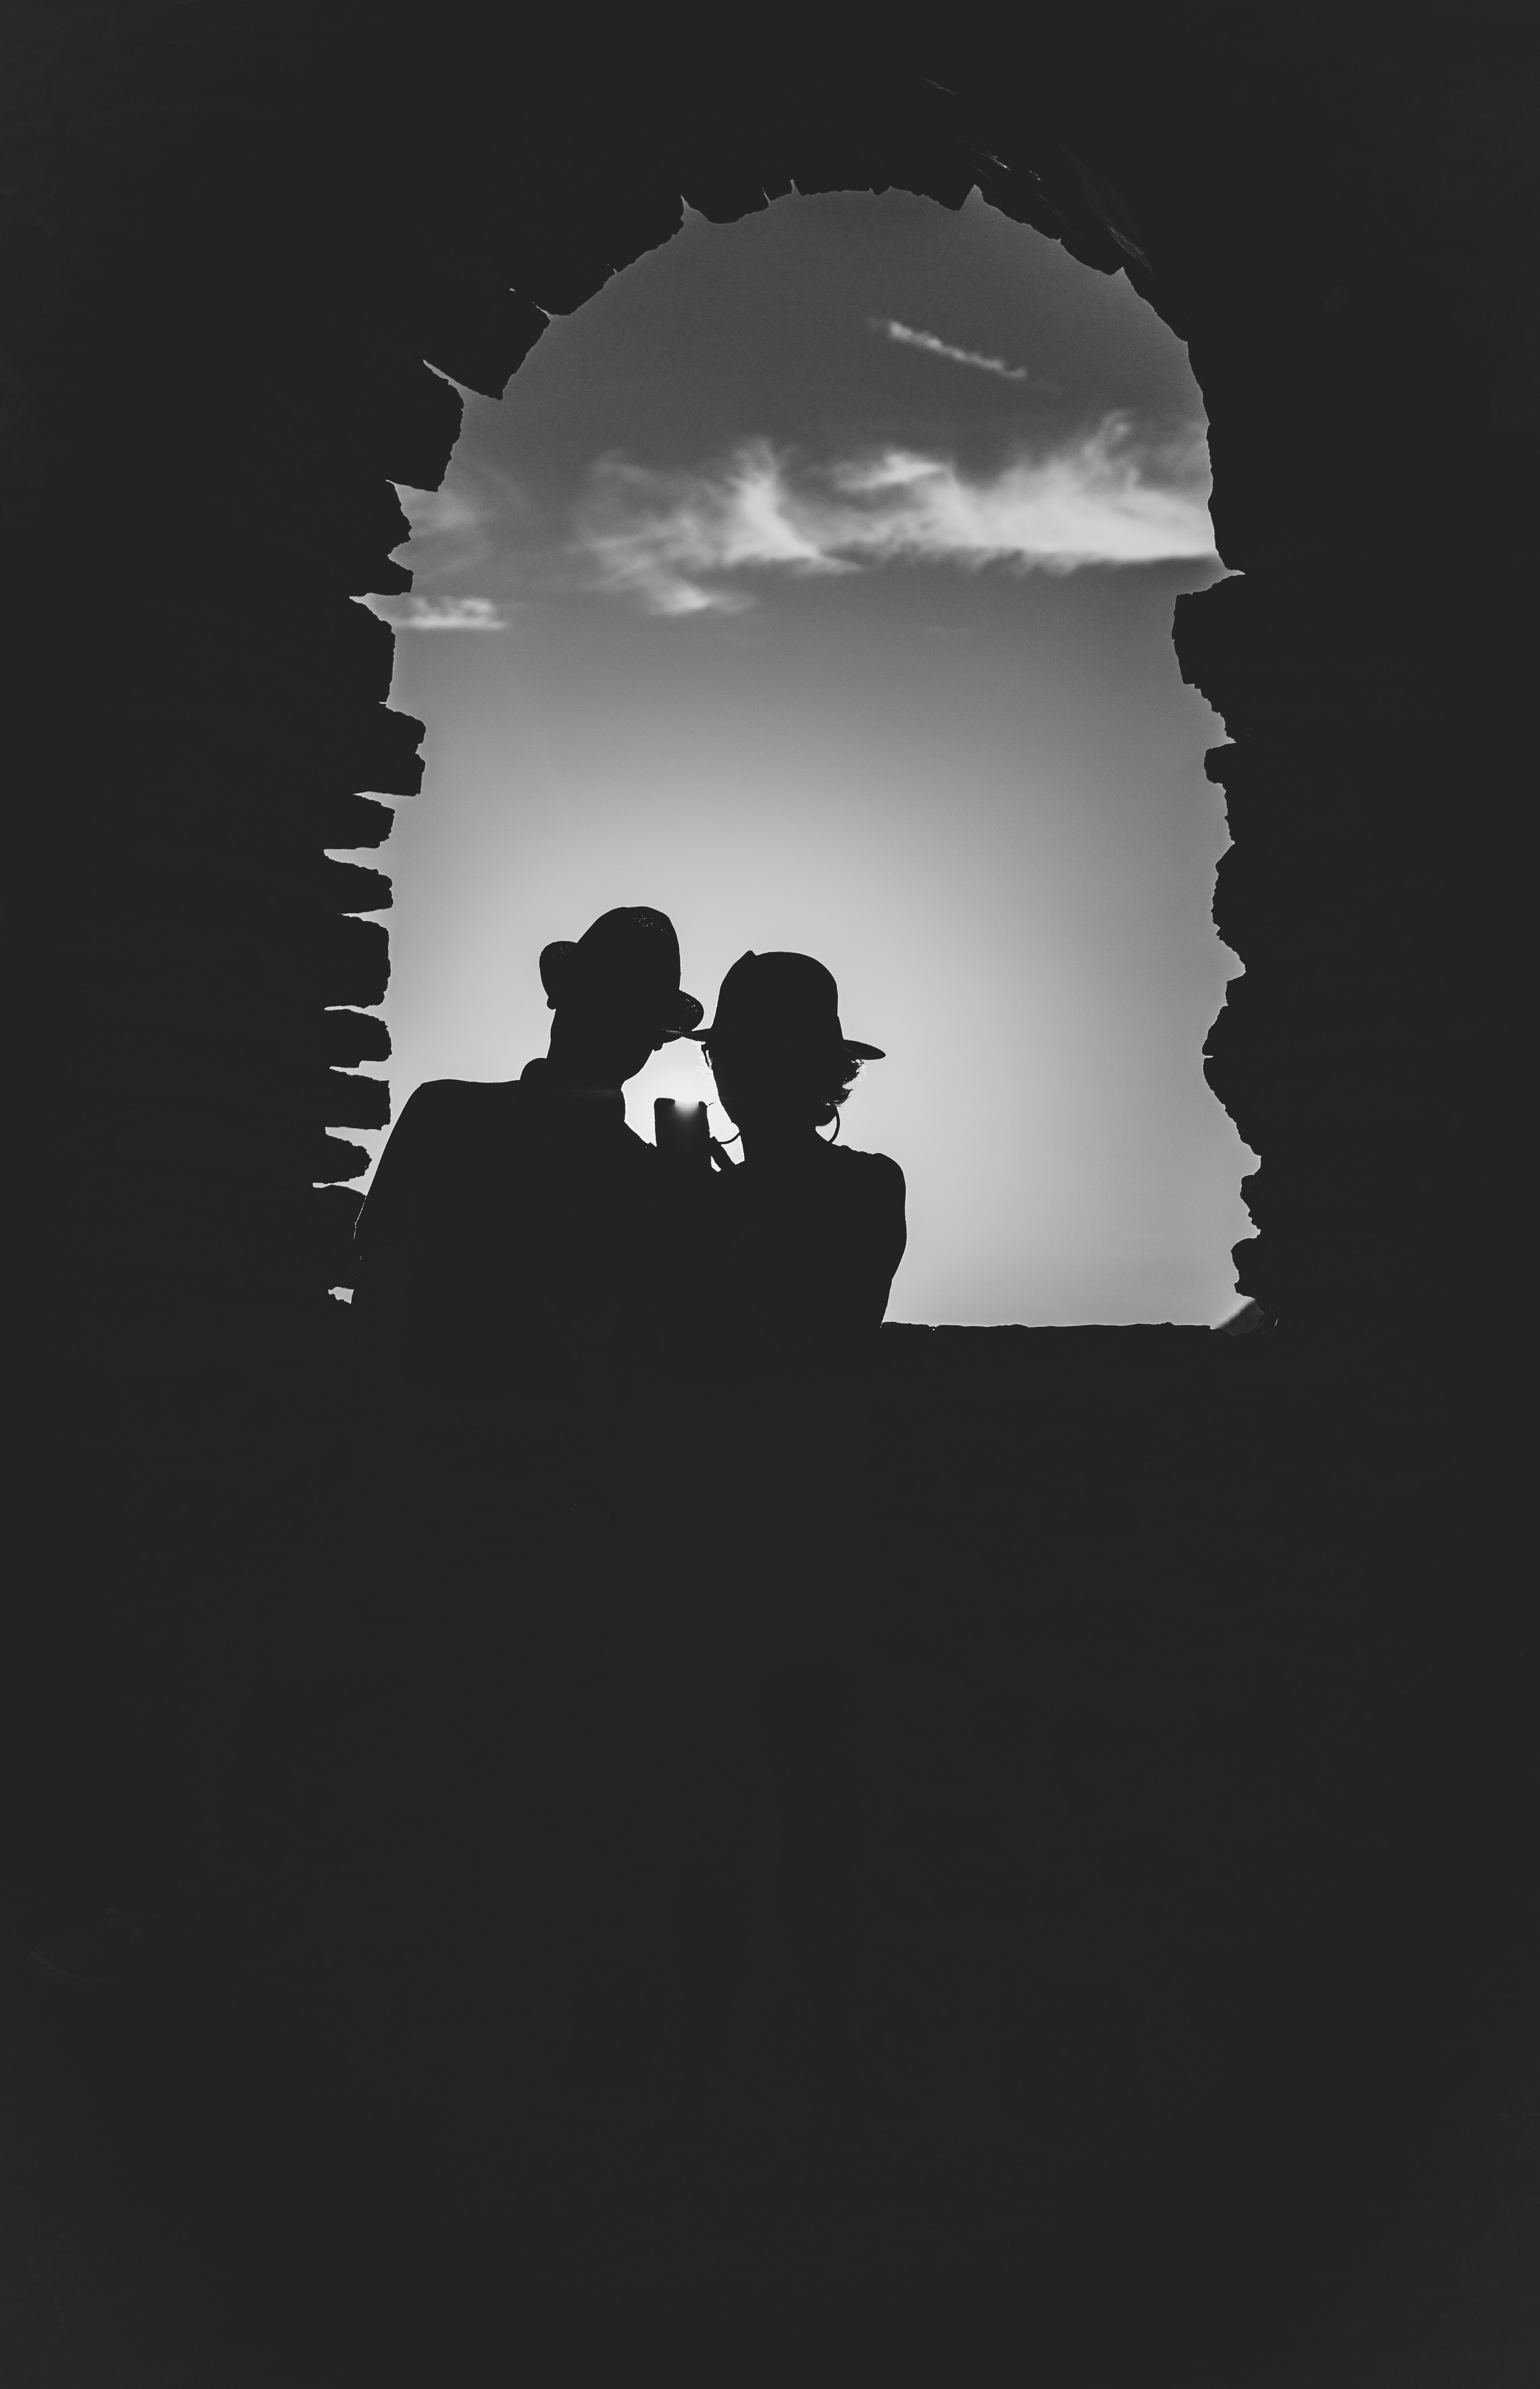 pair, bw, couple, silhouettes, black, sunset, chb, arch